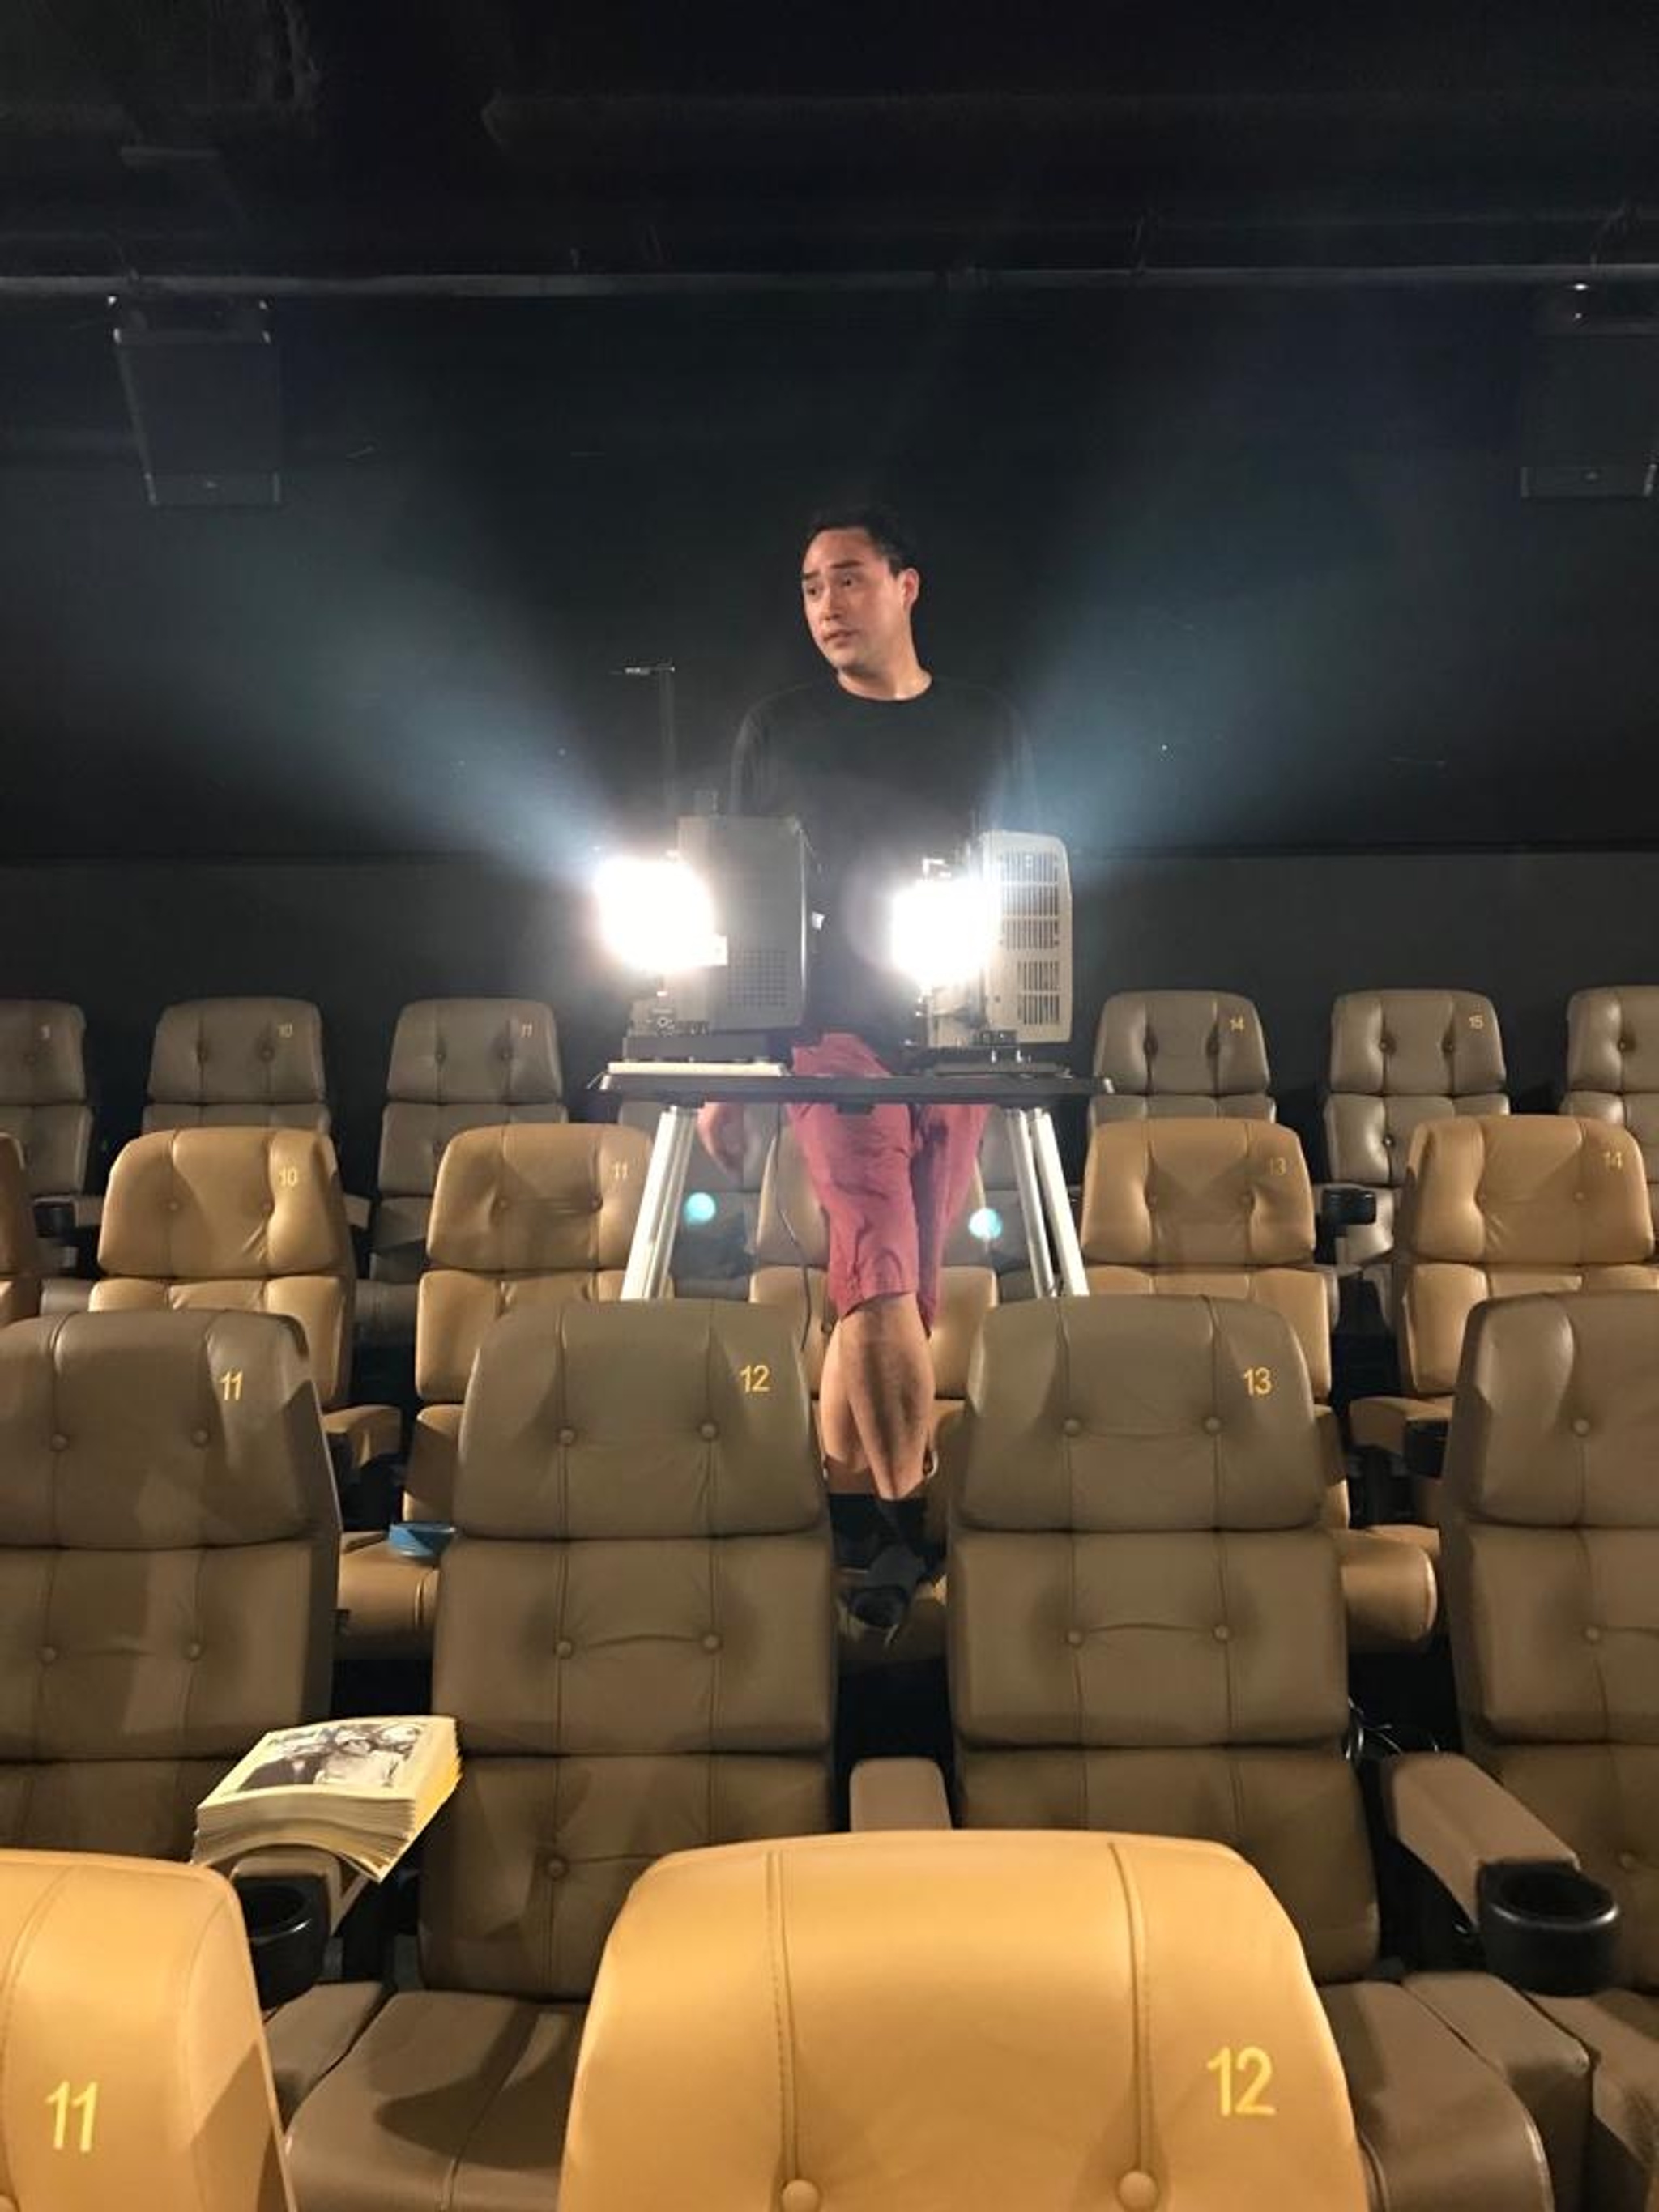  A photo of the artist Simon Liu in a black longsleeve shirt and red shorts, standing behind a projector and rows of seats in a movie theater.